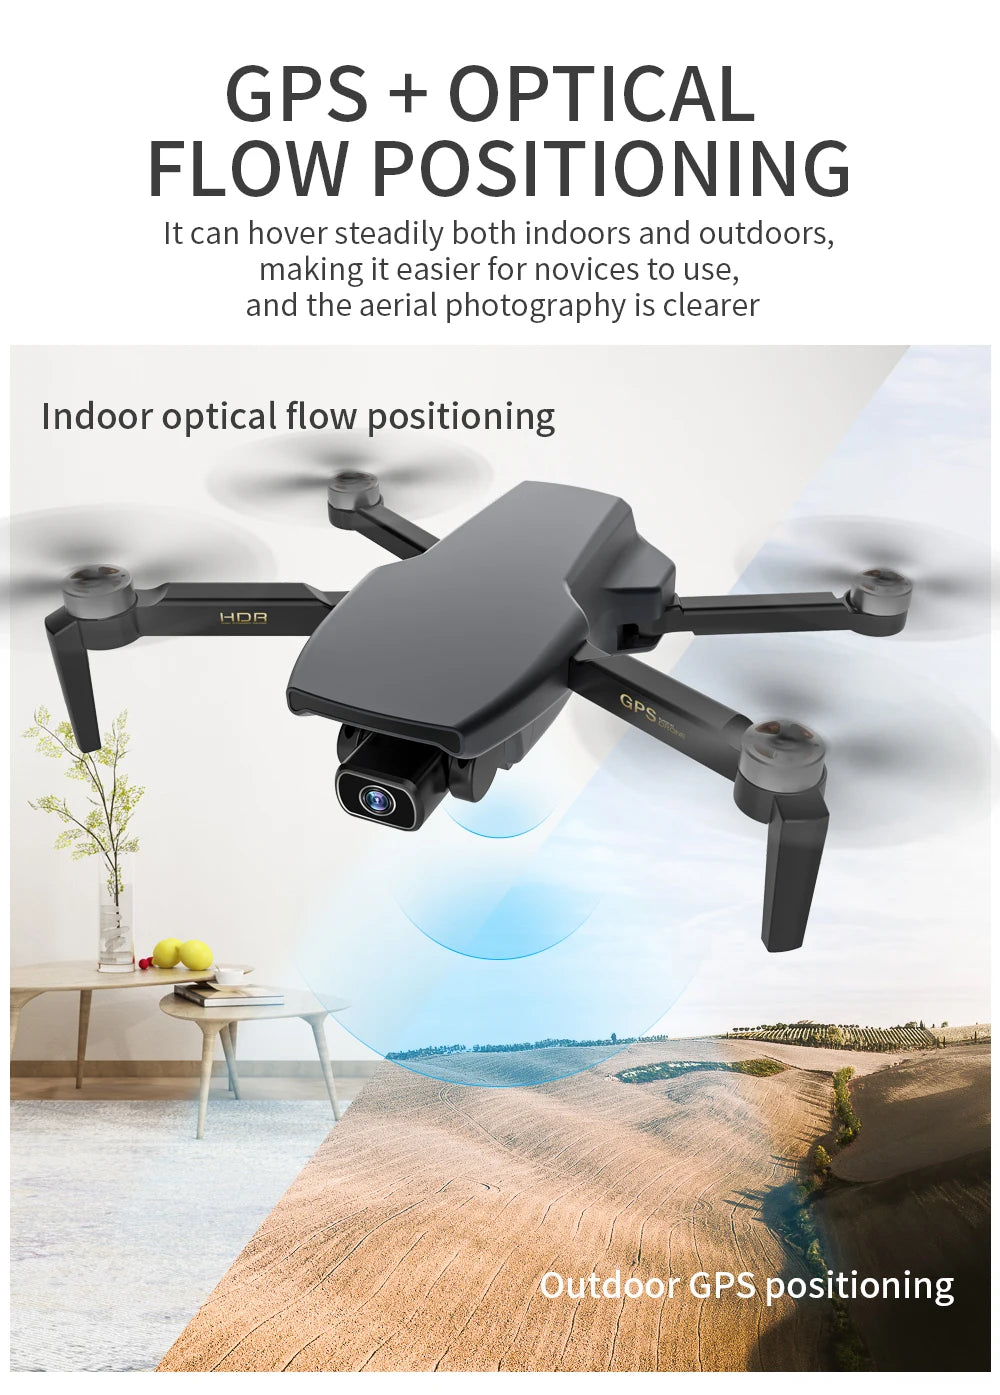 G108 Pro MAx Drone, GPS + OPTICAL FLOW POSITIONING It can hover steadily both indoor